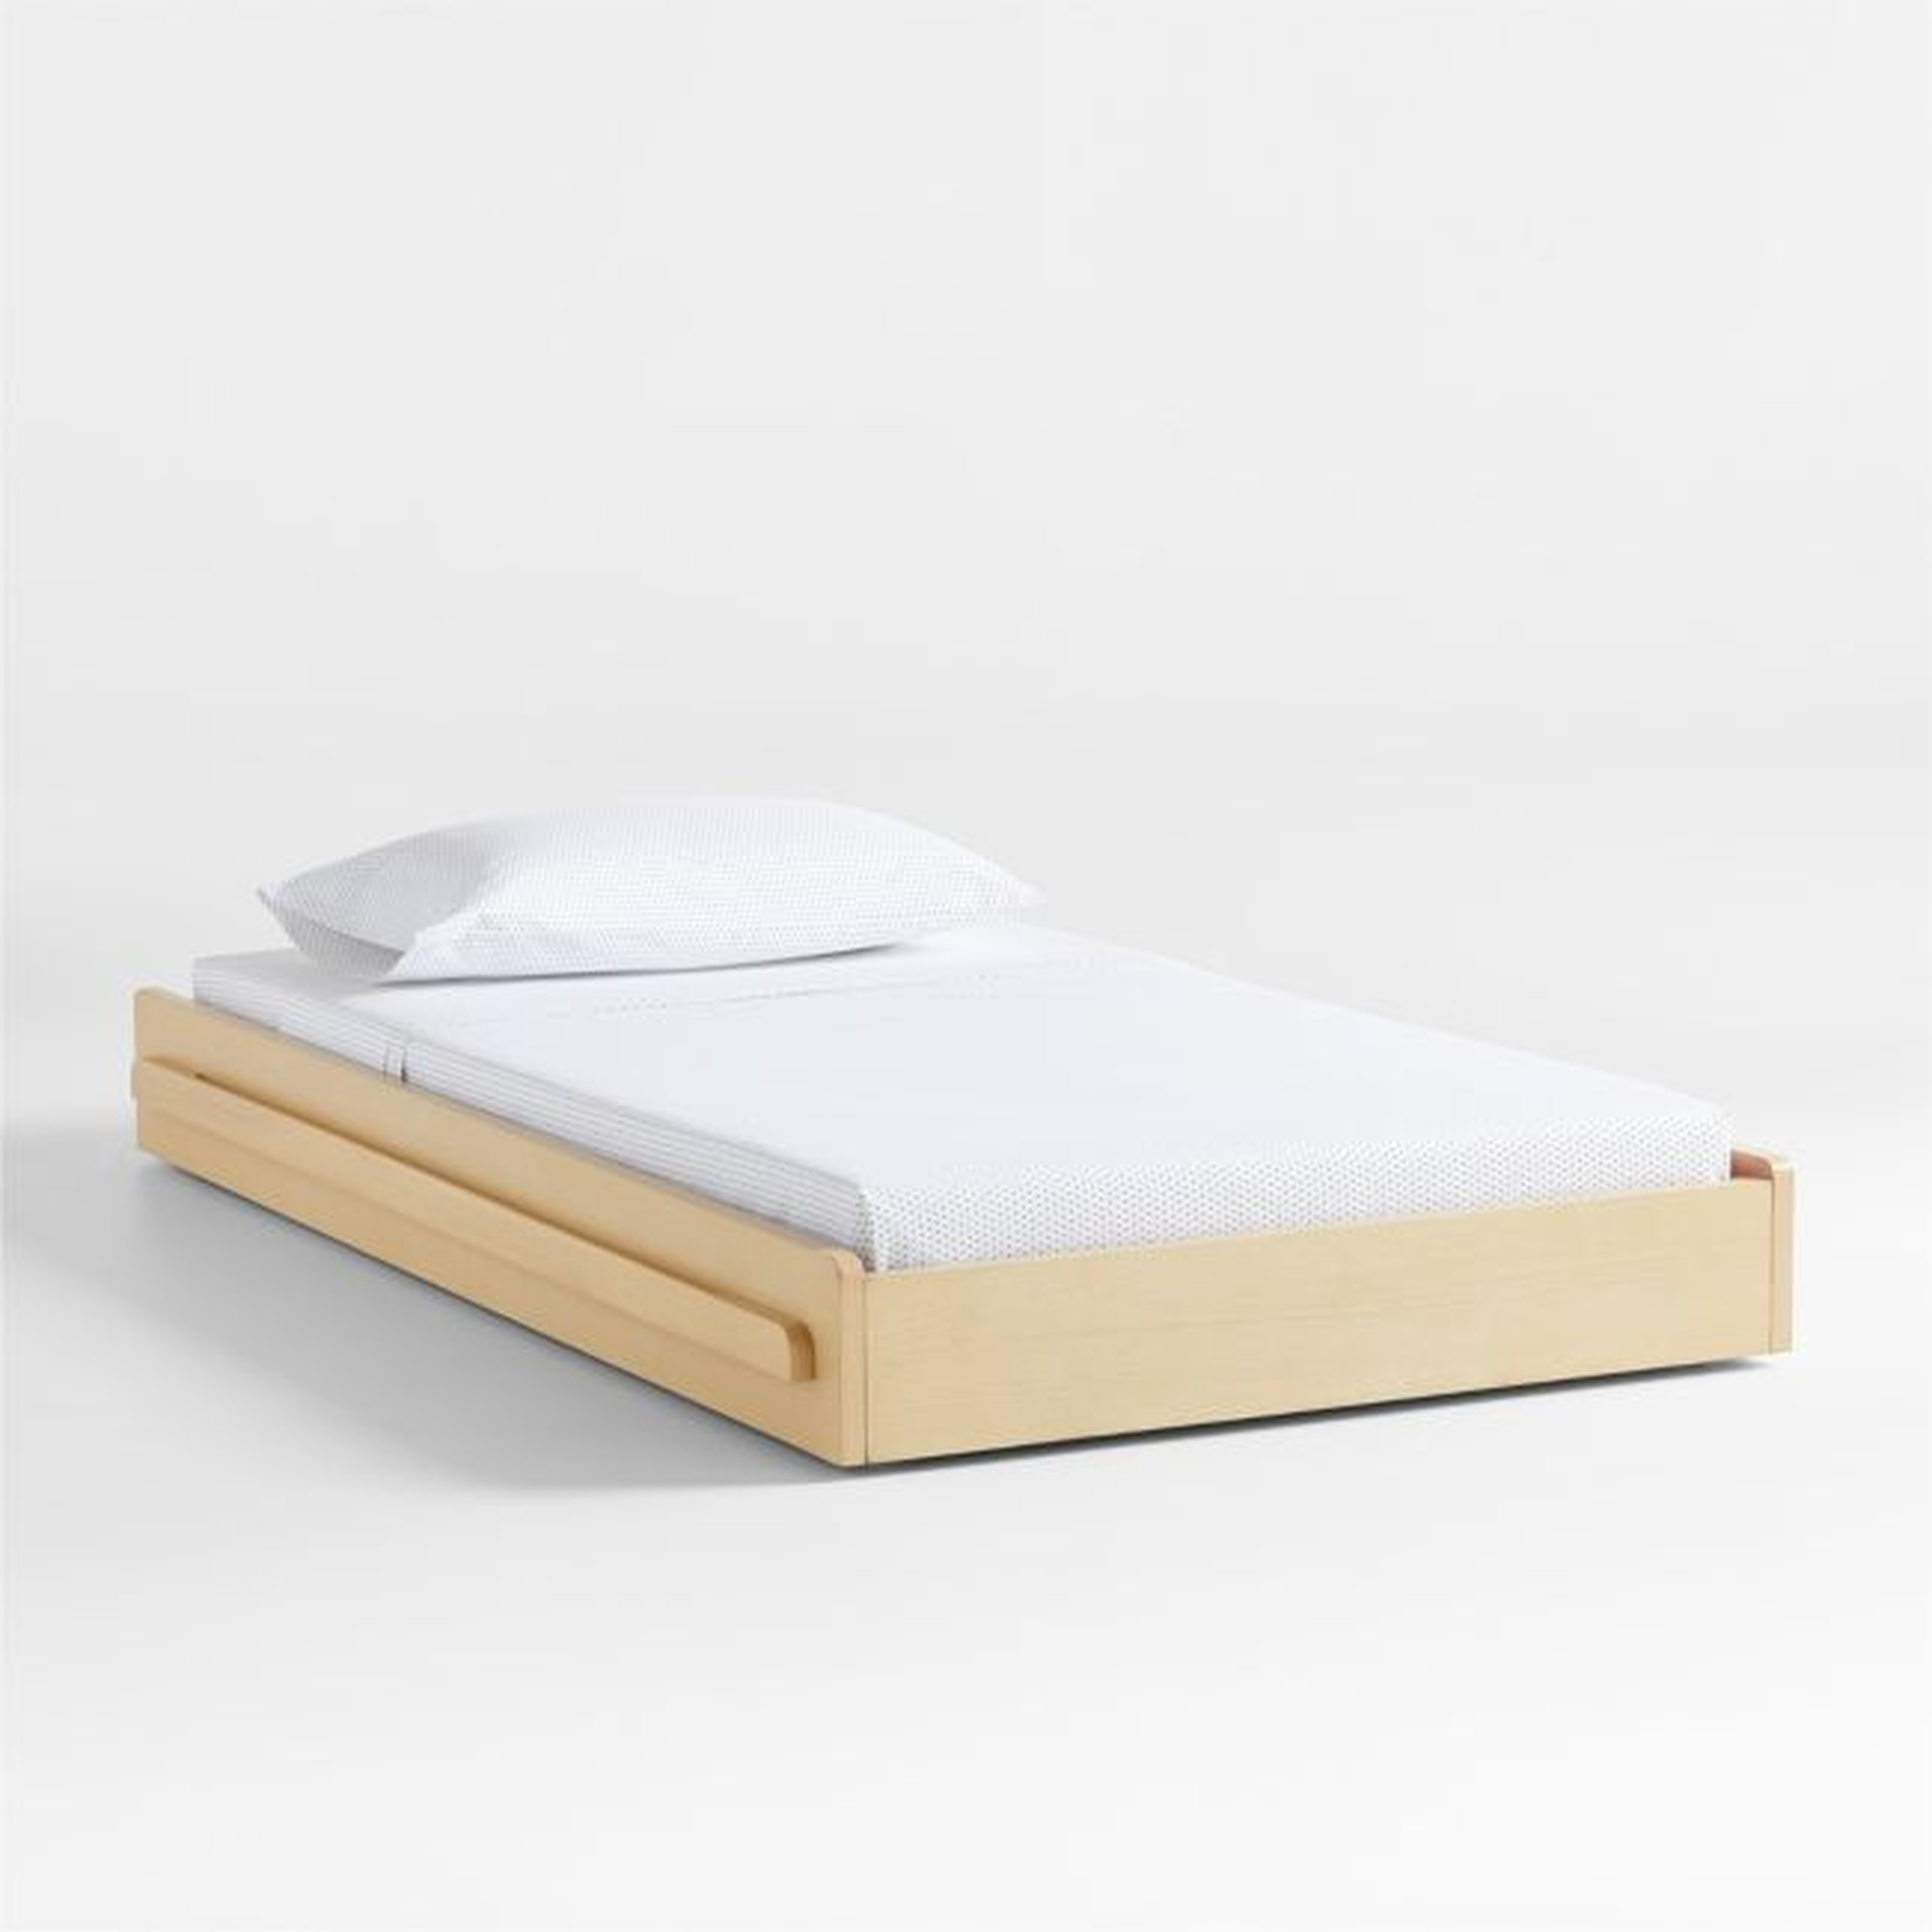 Domino Trundle Bed - Crate and Barrel